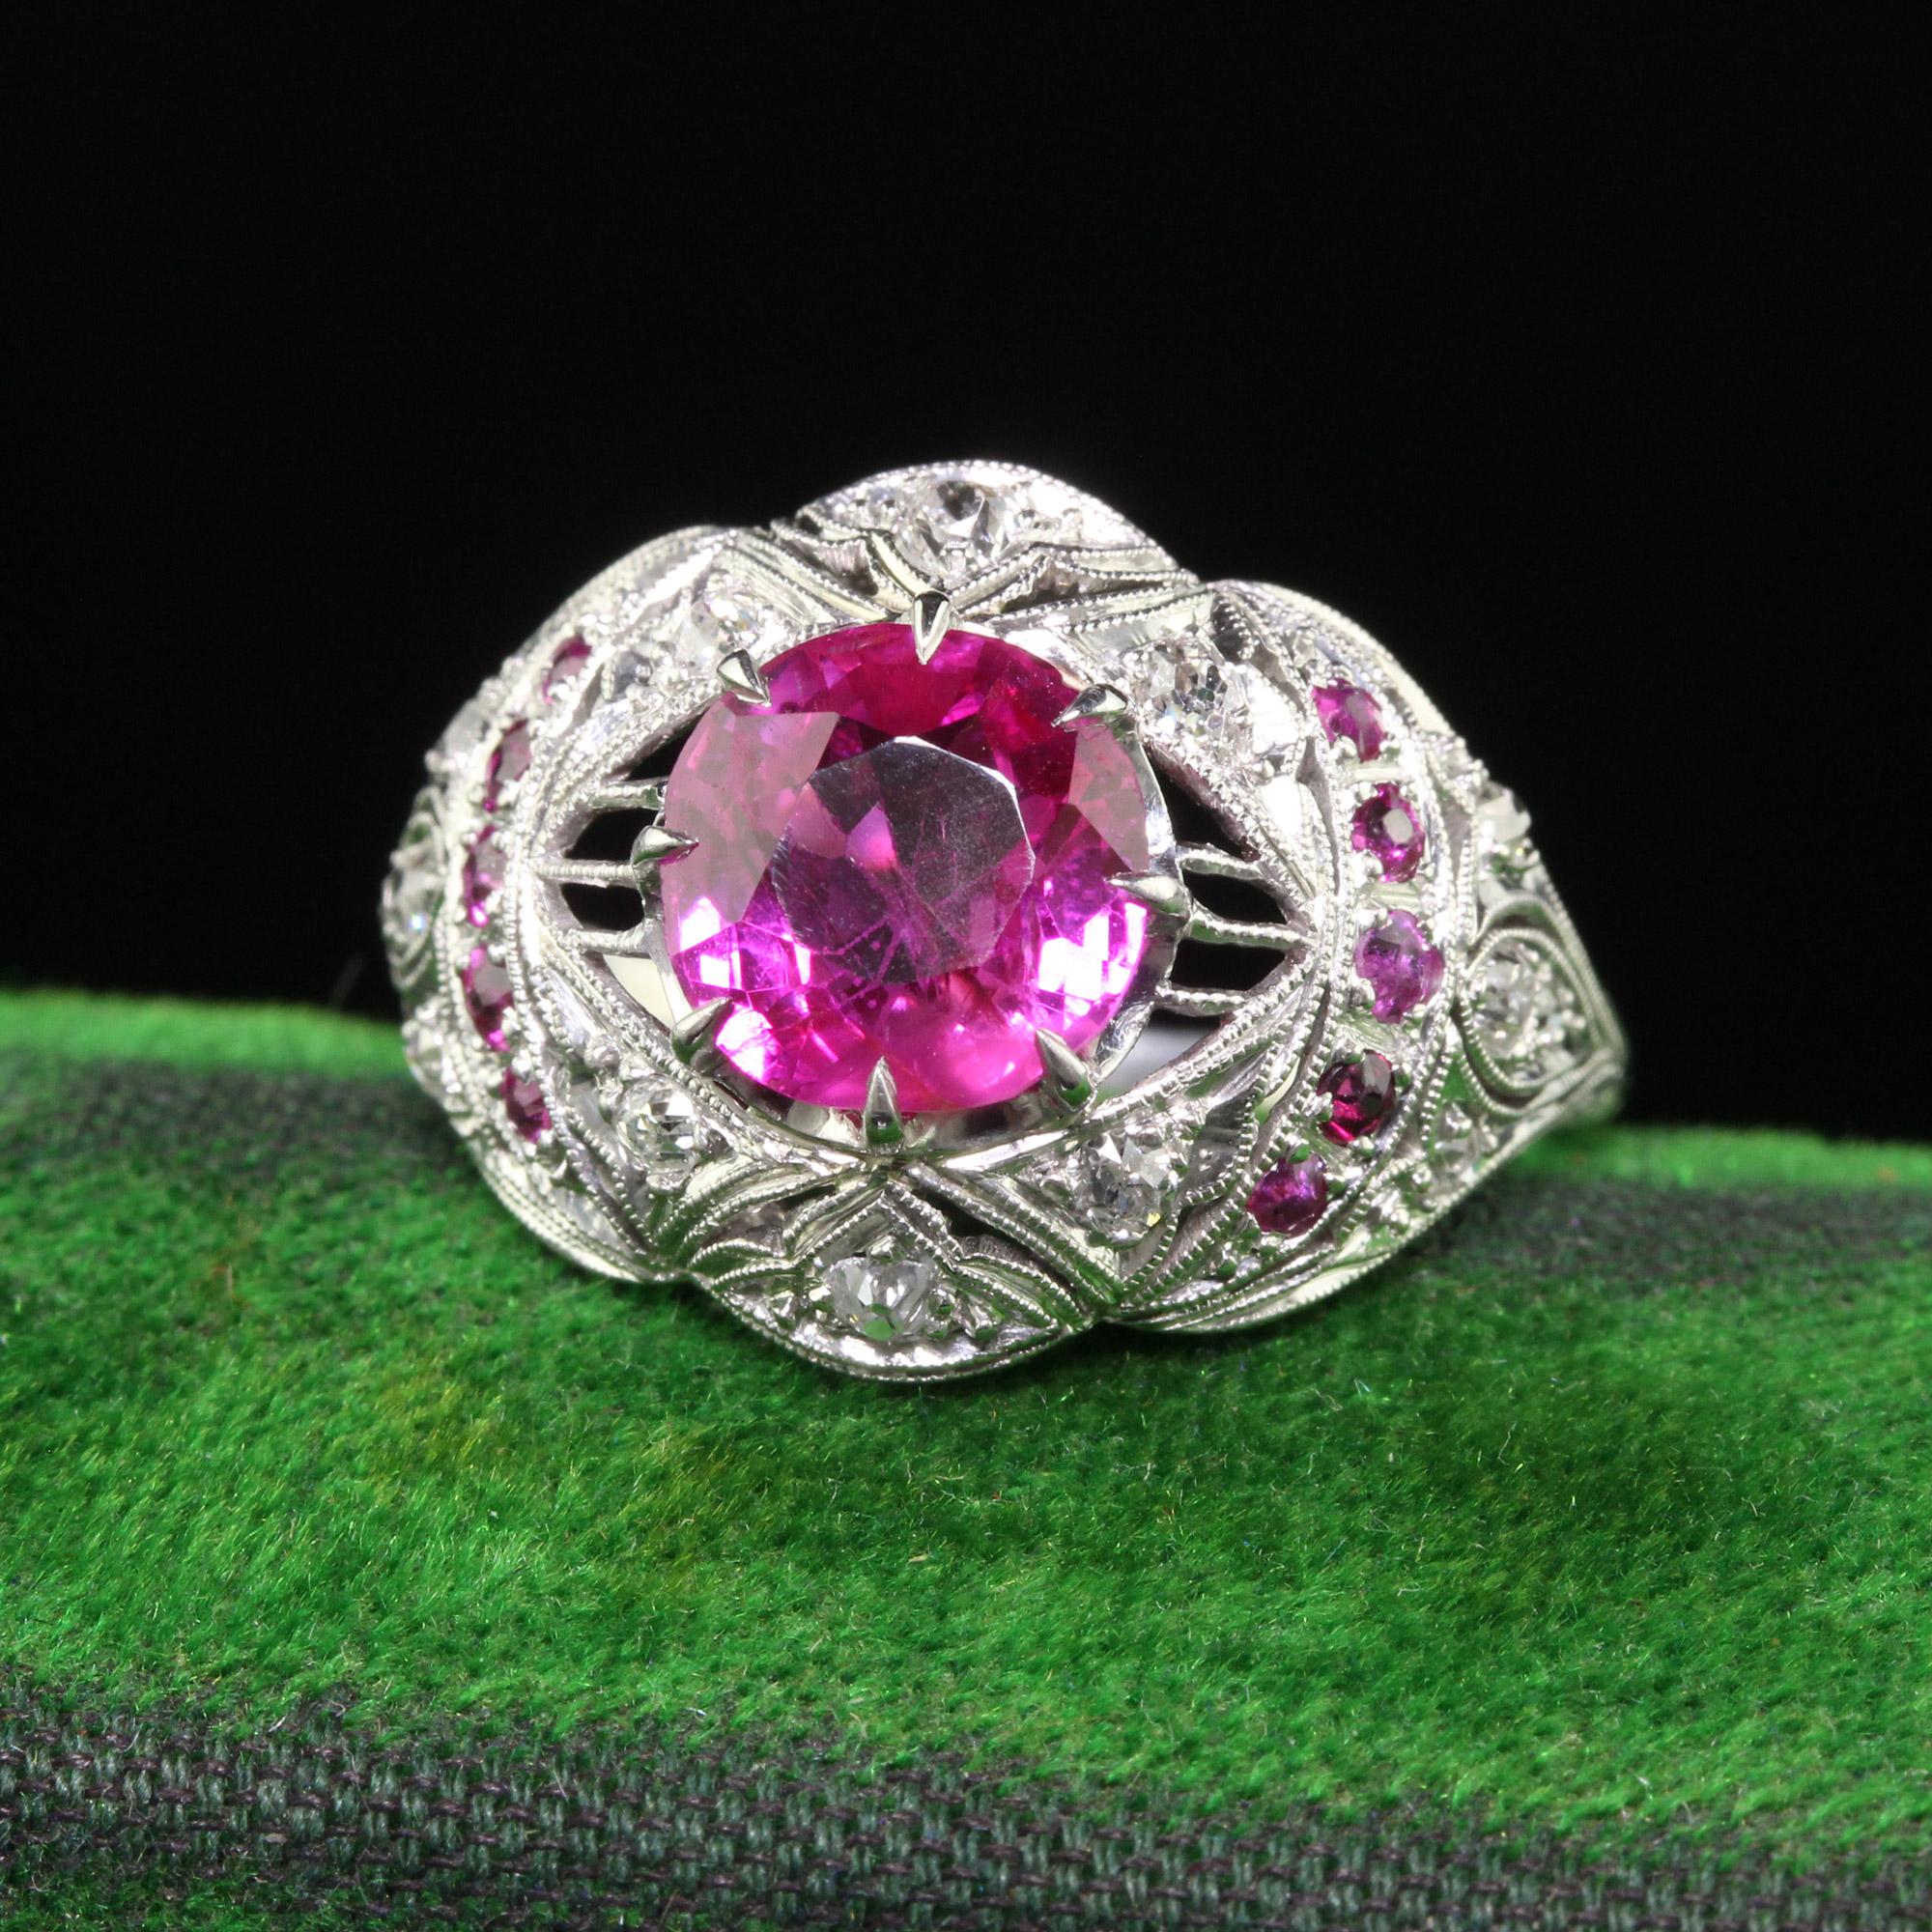 Beautiful Antique Art Deco Platinum Burma Pink Sapphire and Diamond Filigree Engagement Ring - GIA. This gorgeous engagement ring is crafted in platinum. The center holds a natural pink sapphire with a GIA report. It is set in a beautiful Art Deco